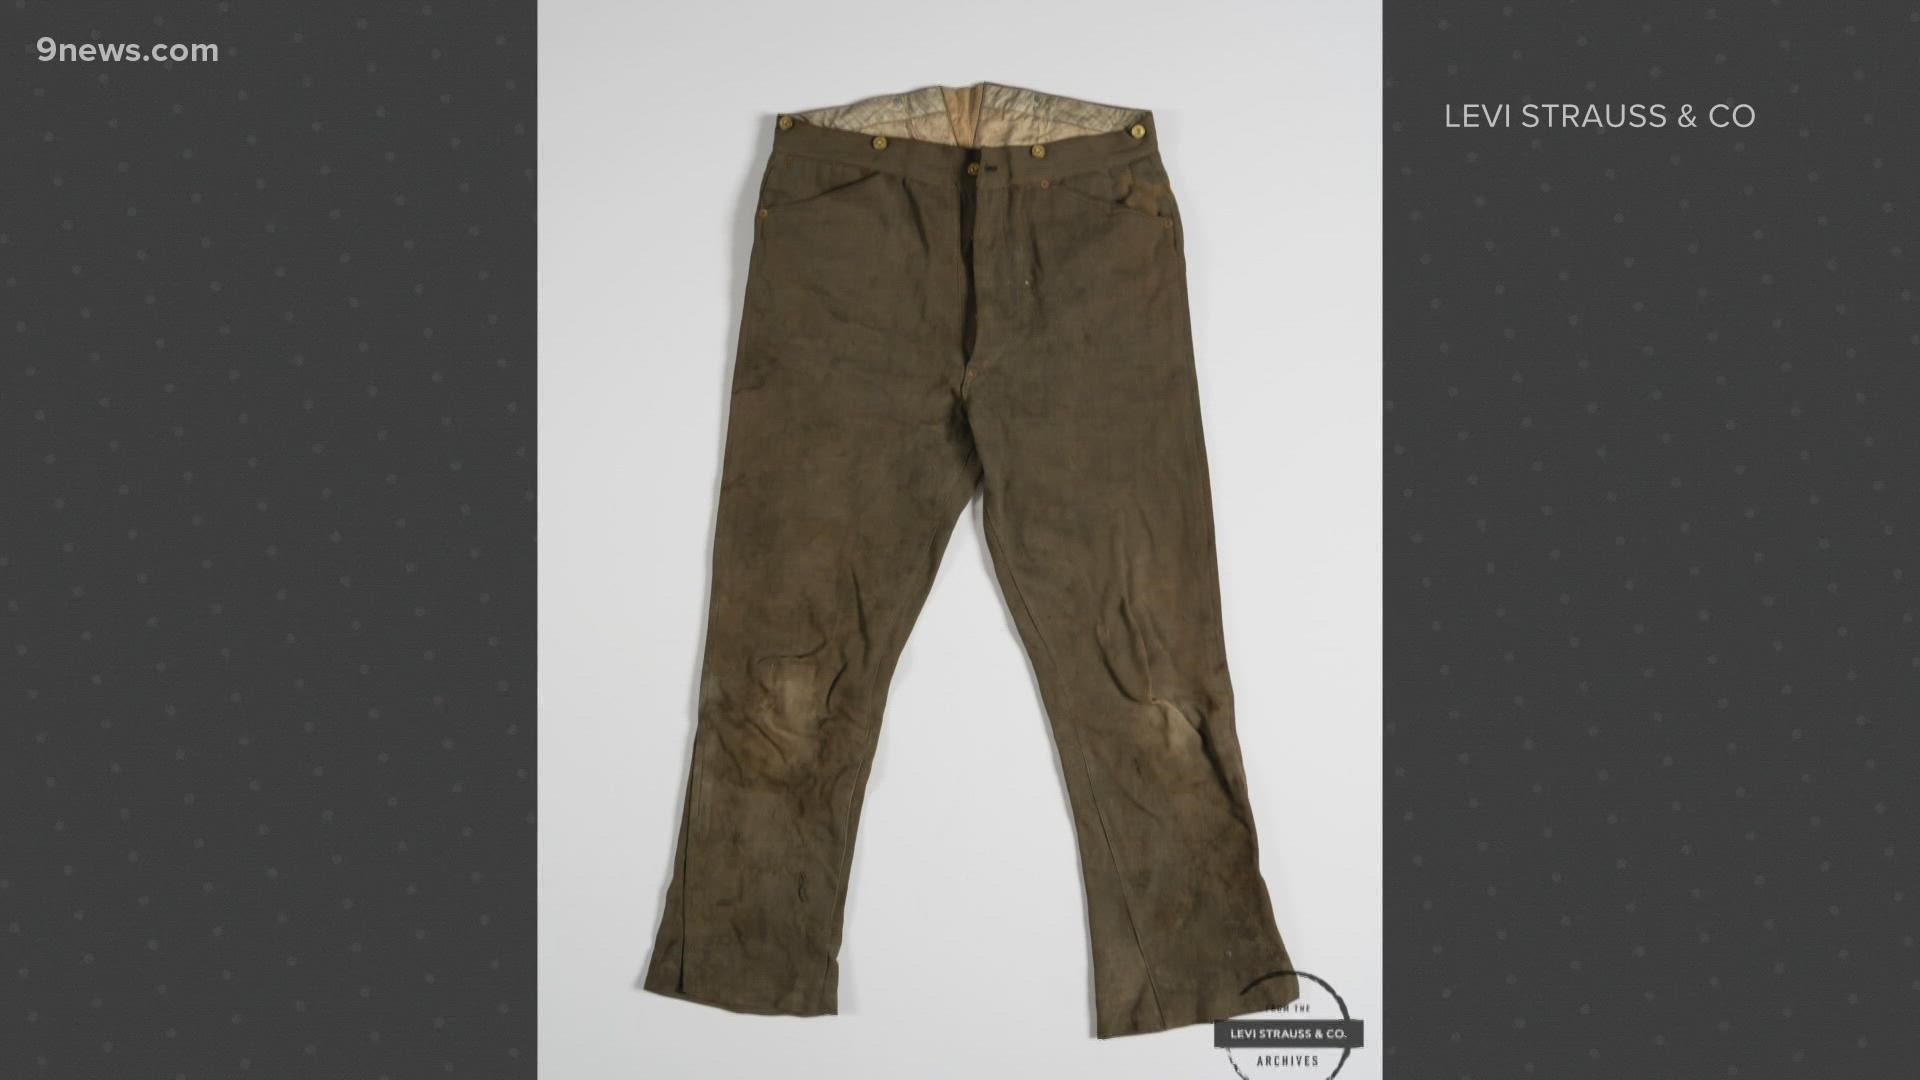 Jeans unearthed in Colorado home added to Levi's archives 